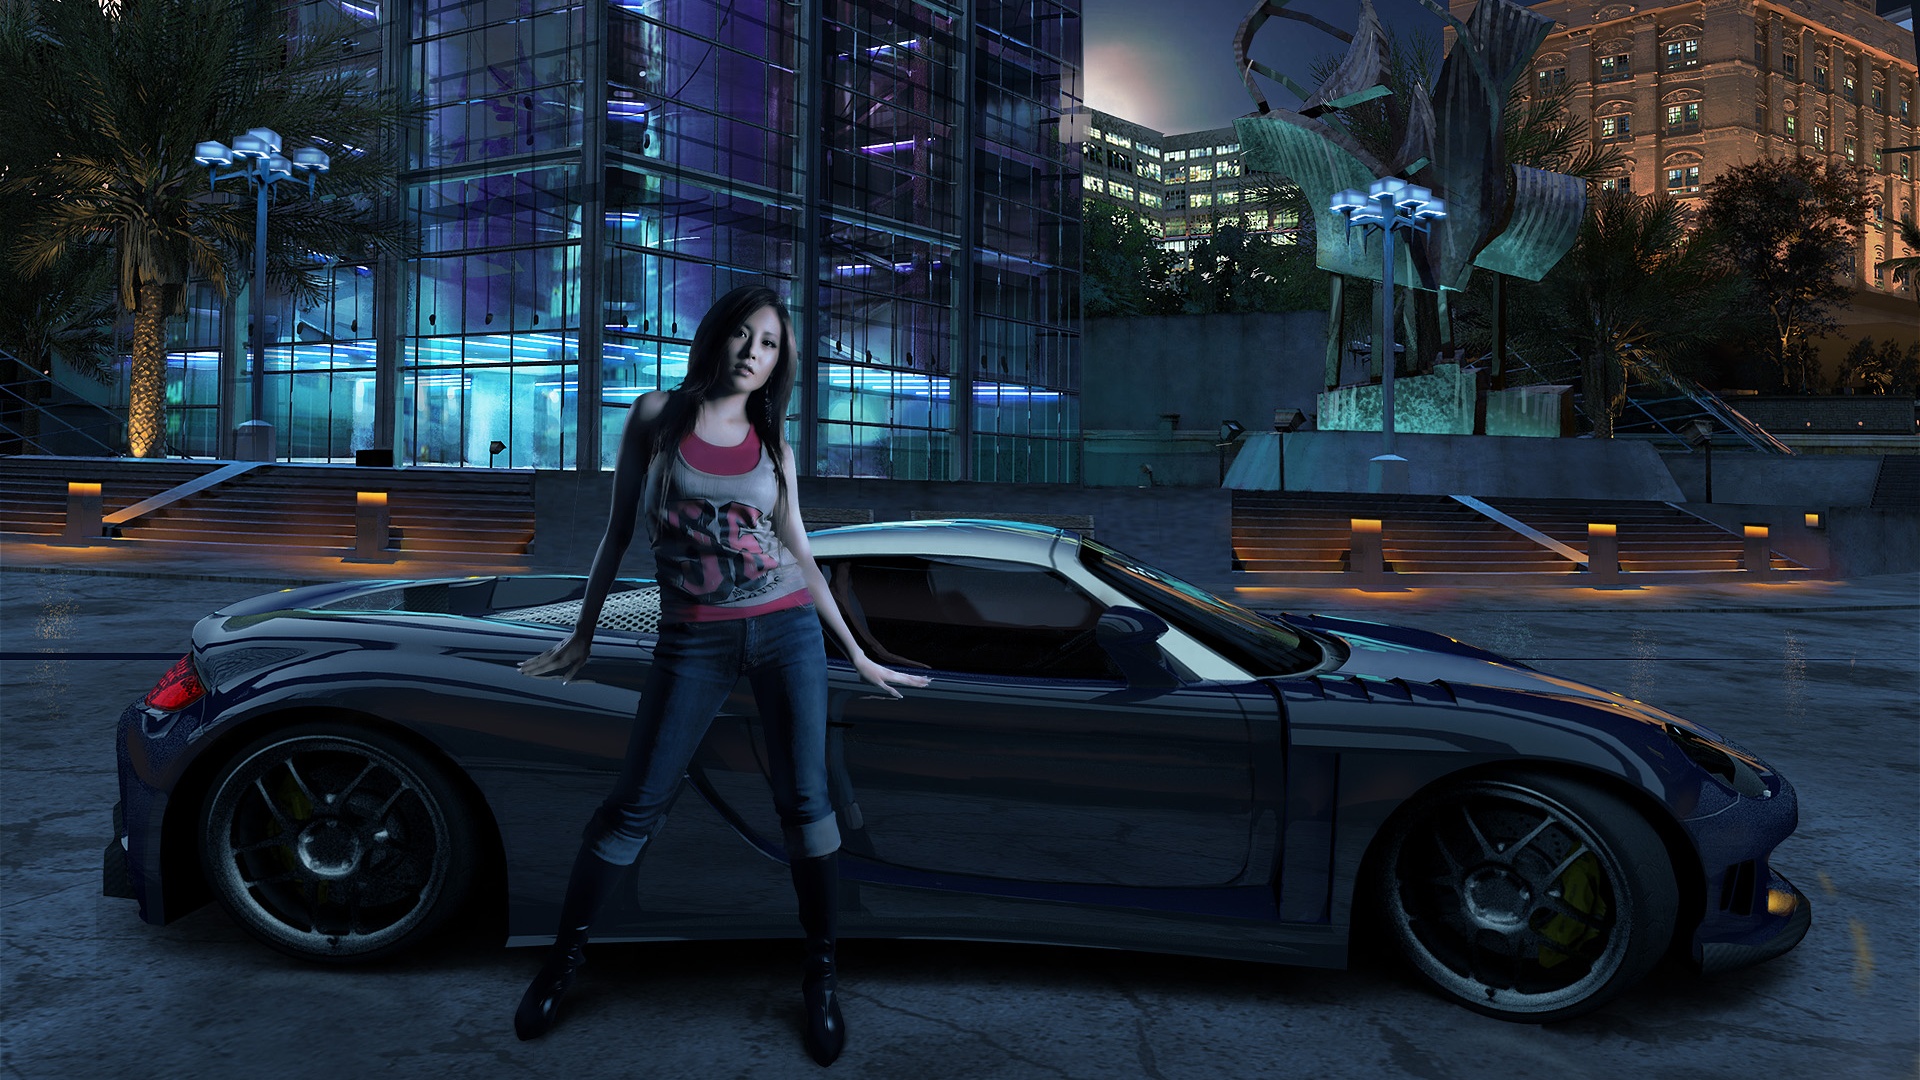 Car Building Girl Woman Need For Speed 1920x1080